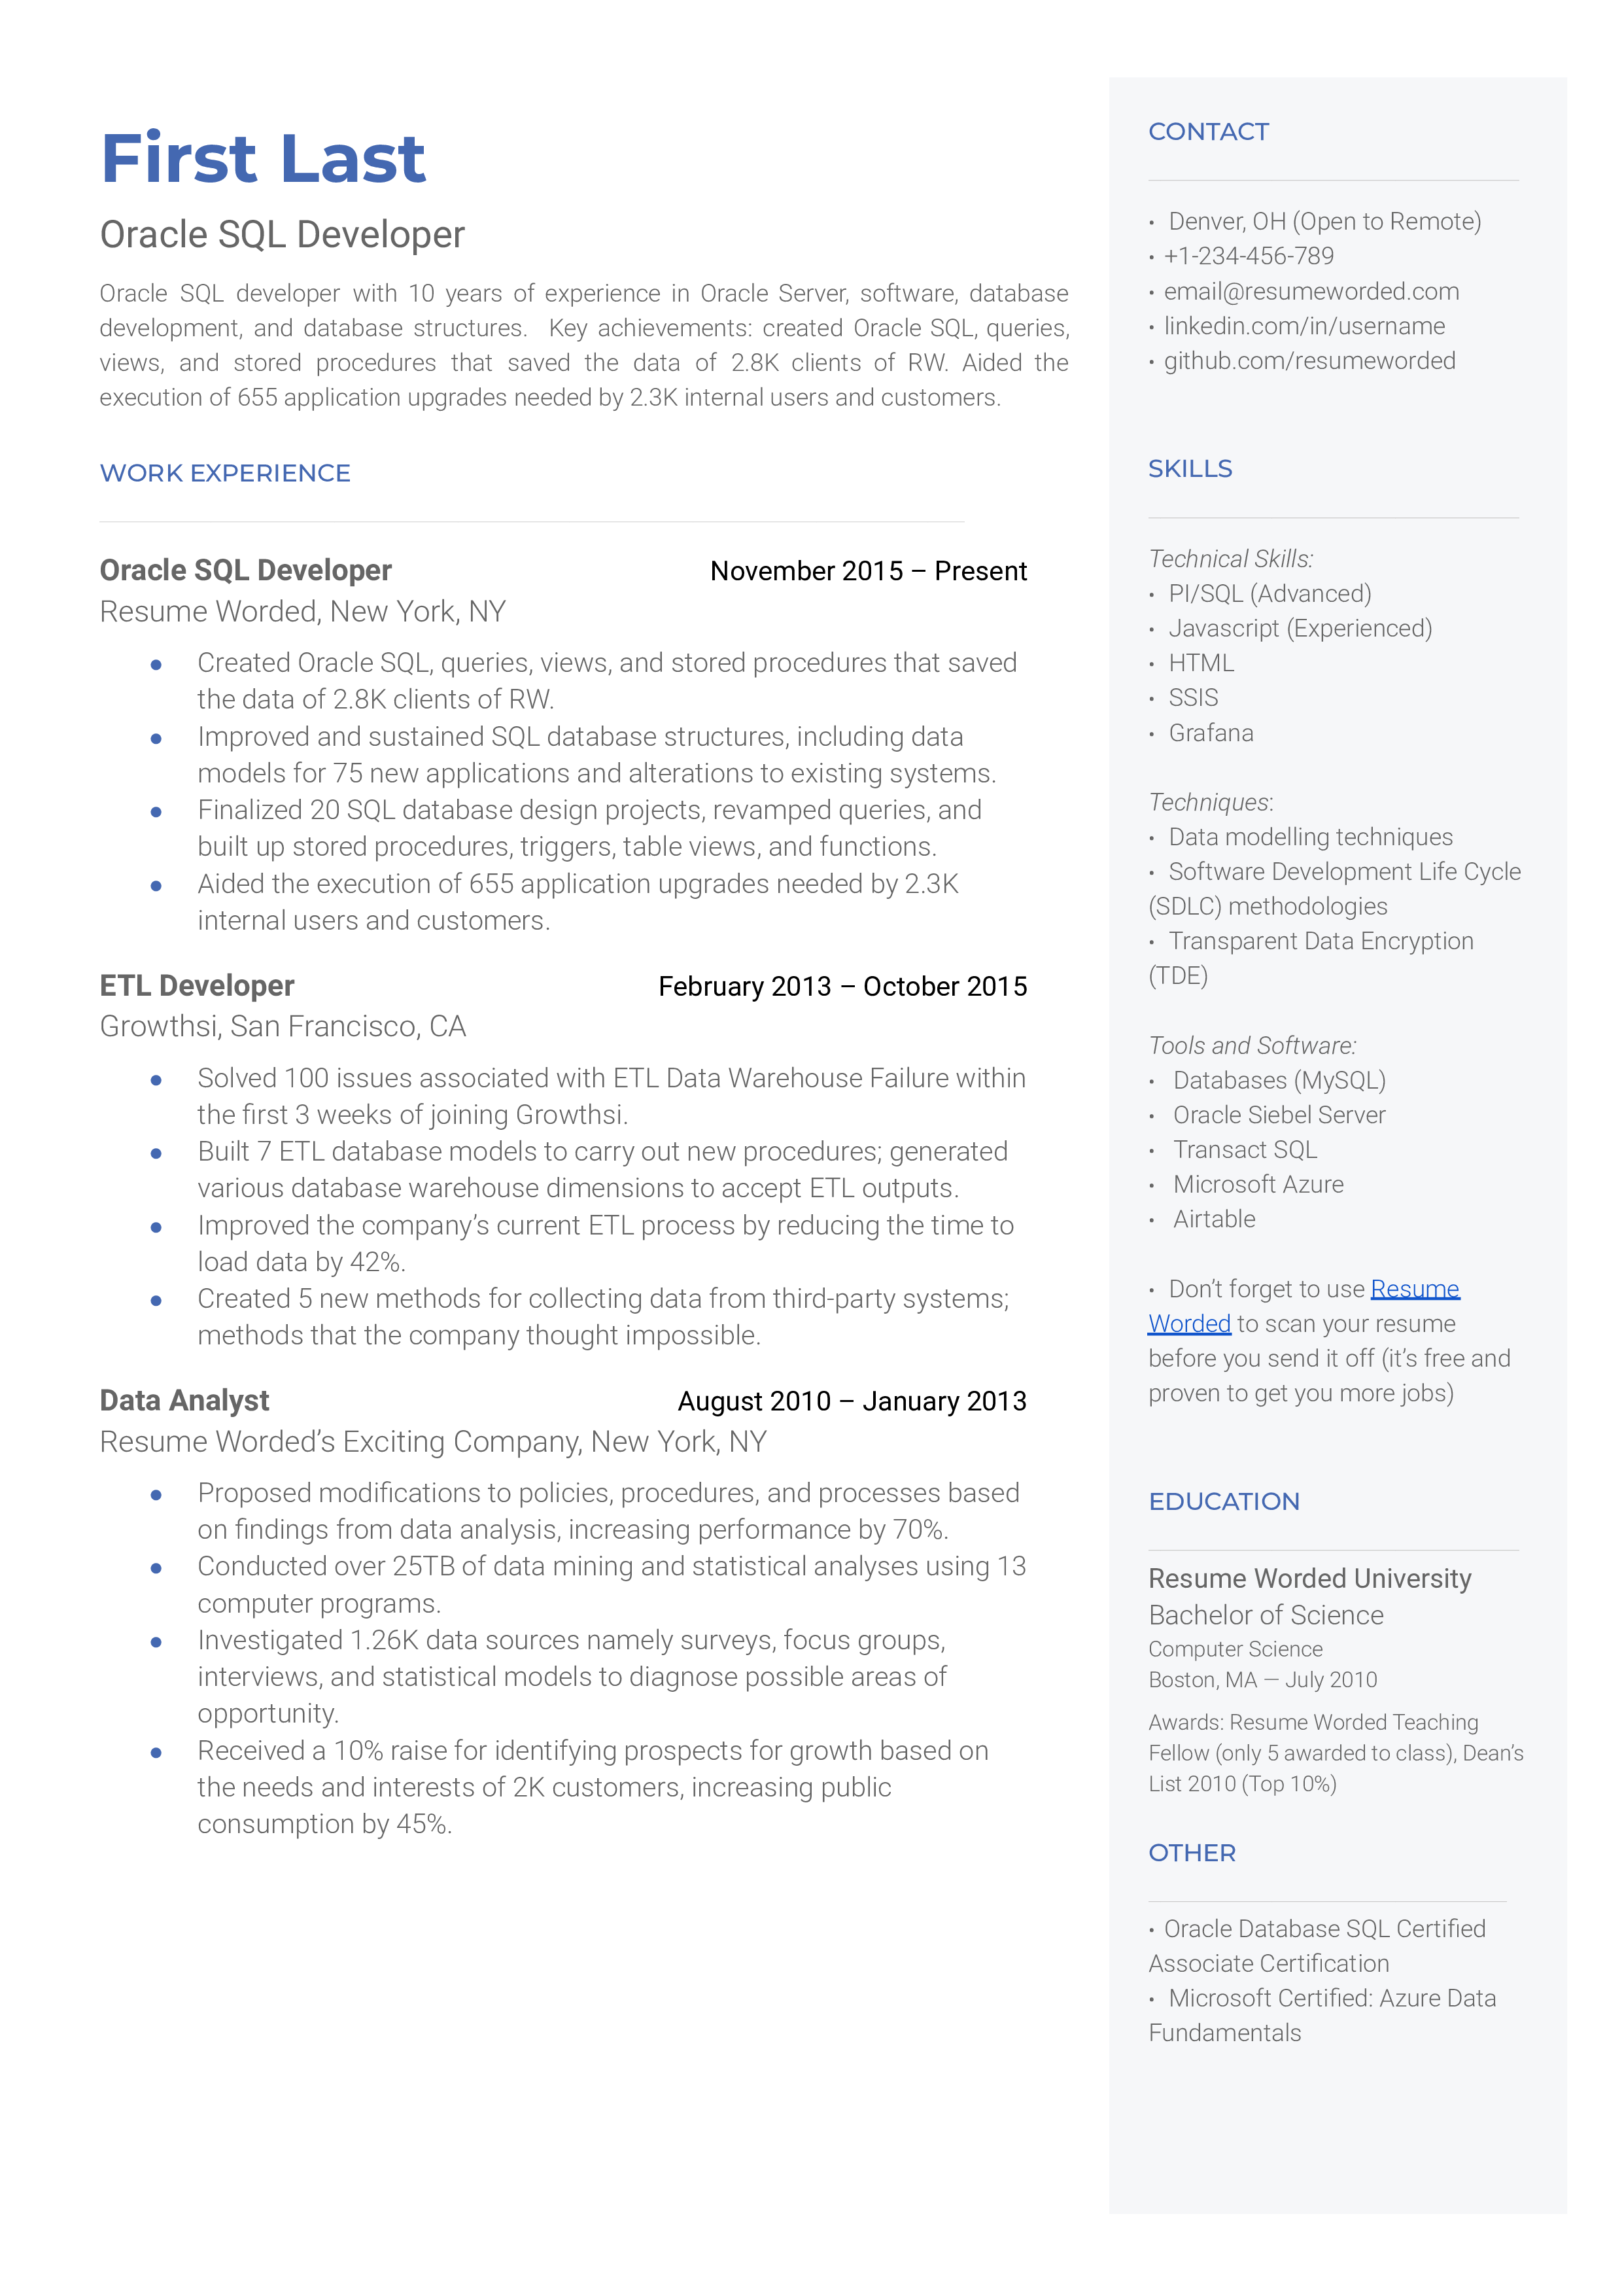 An Oracle SQL developer's CV showcasing technical skills and project experiences.